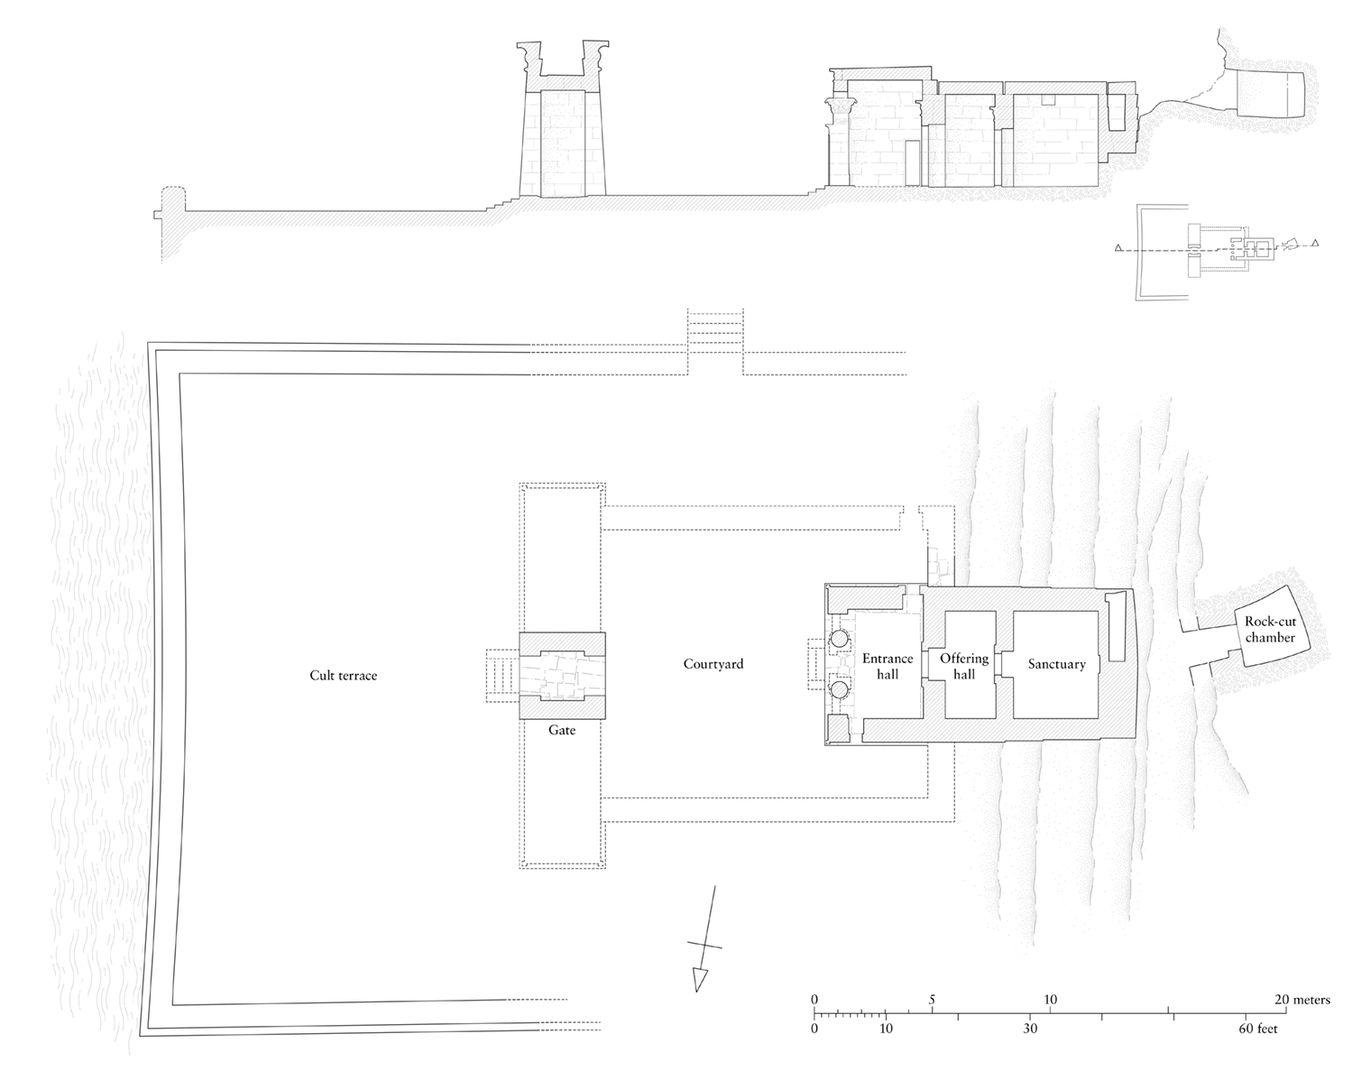 A computer rending of the plan and section of the Temple of Dendur.